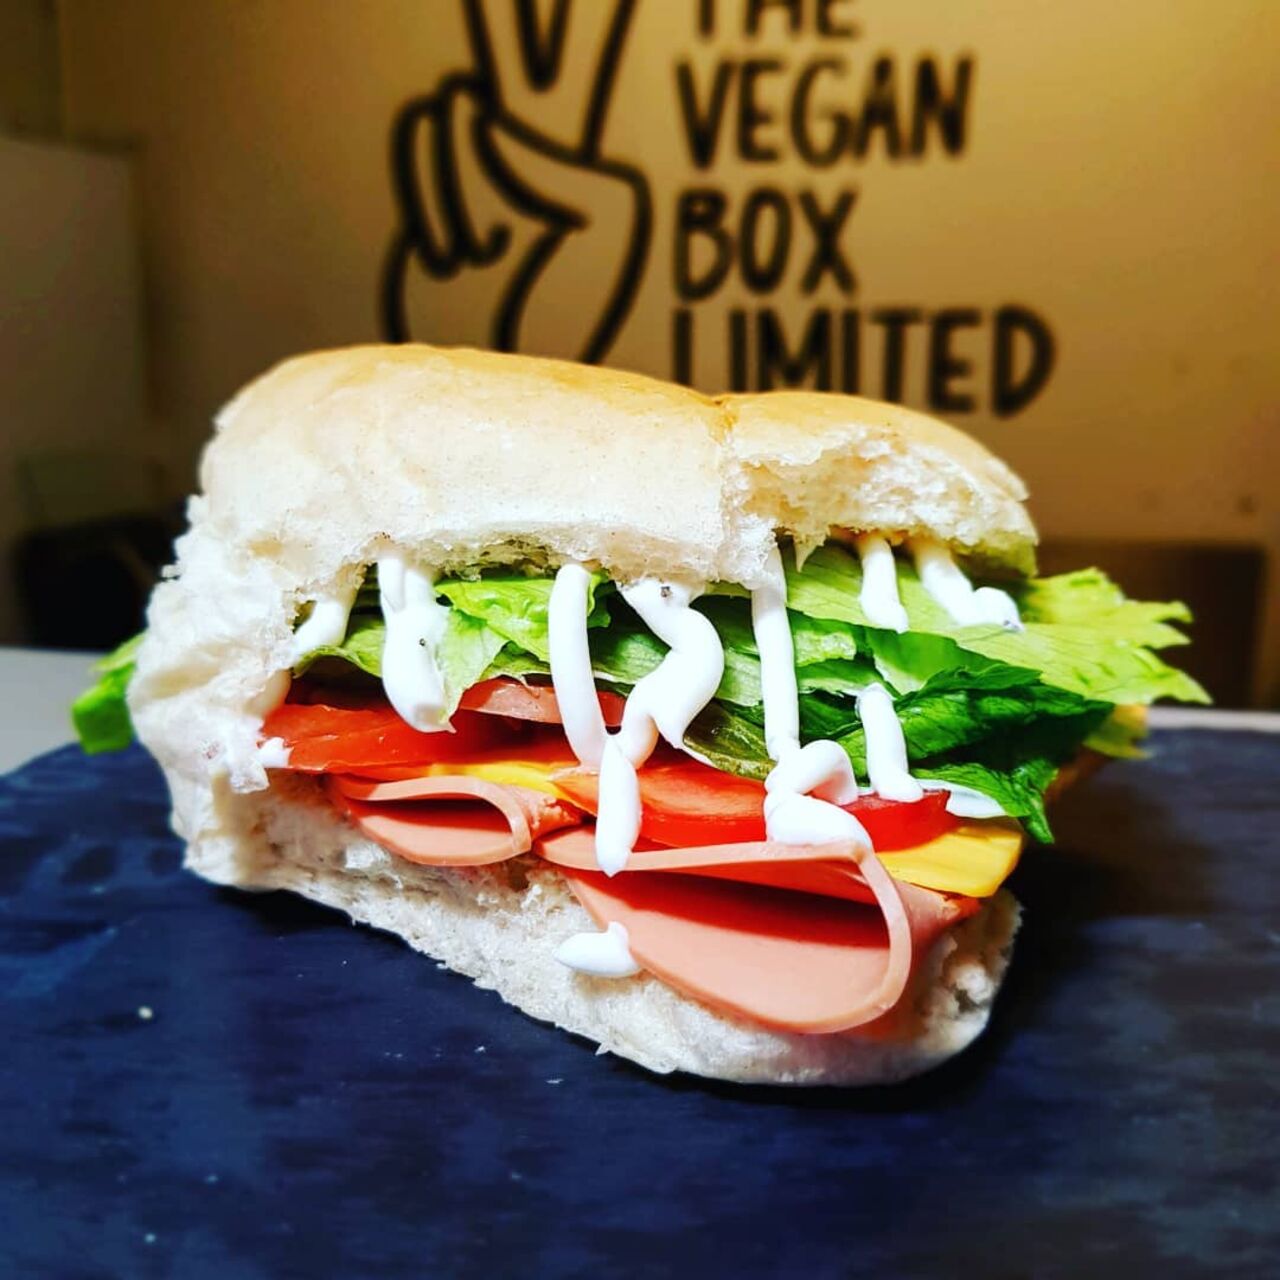 A photo of The Vegan Box Limited